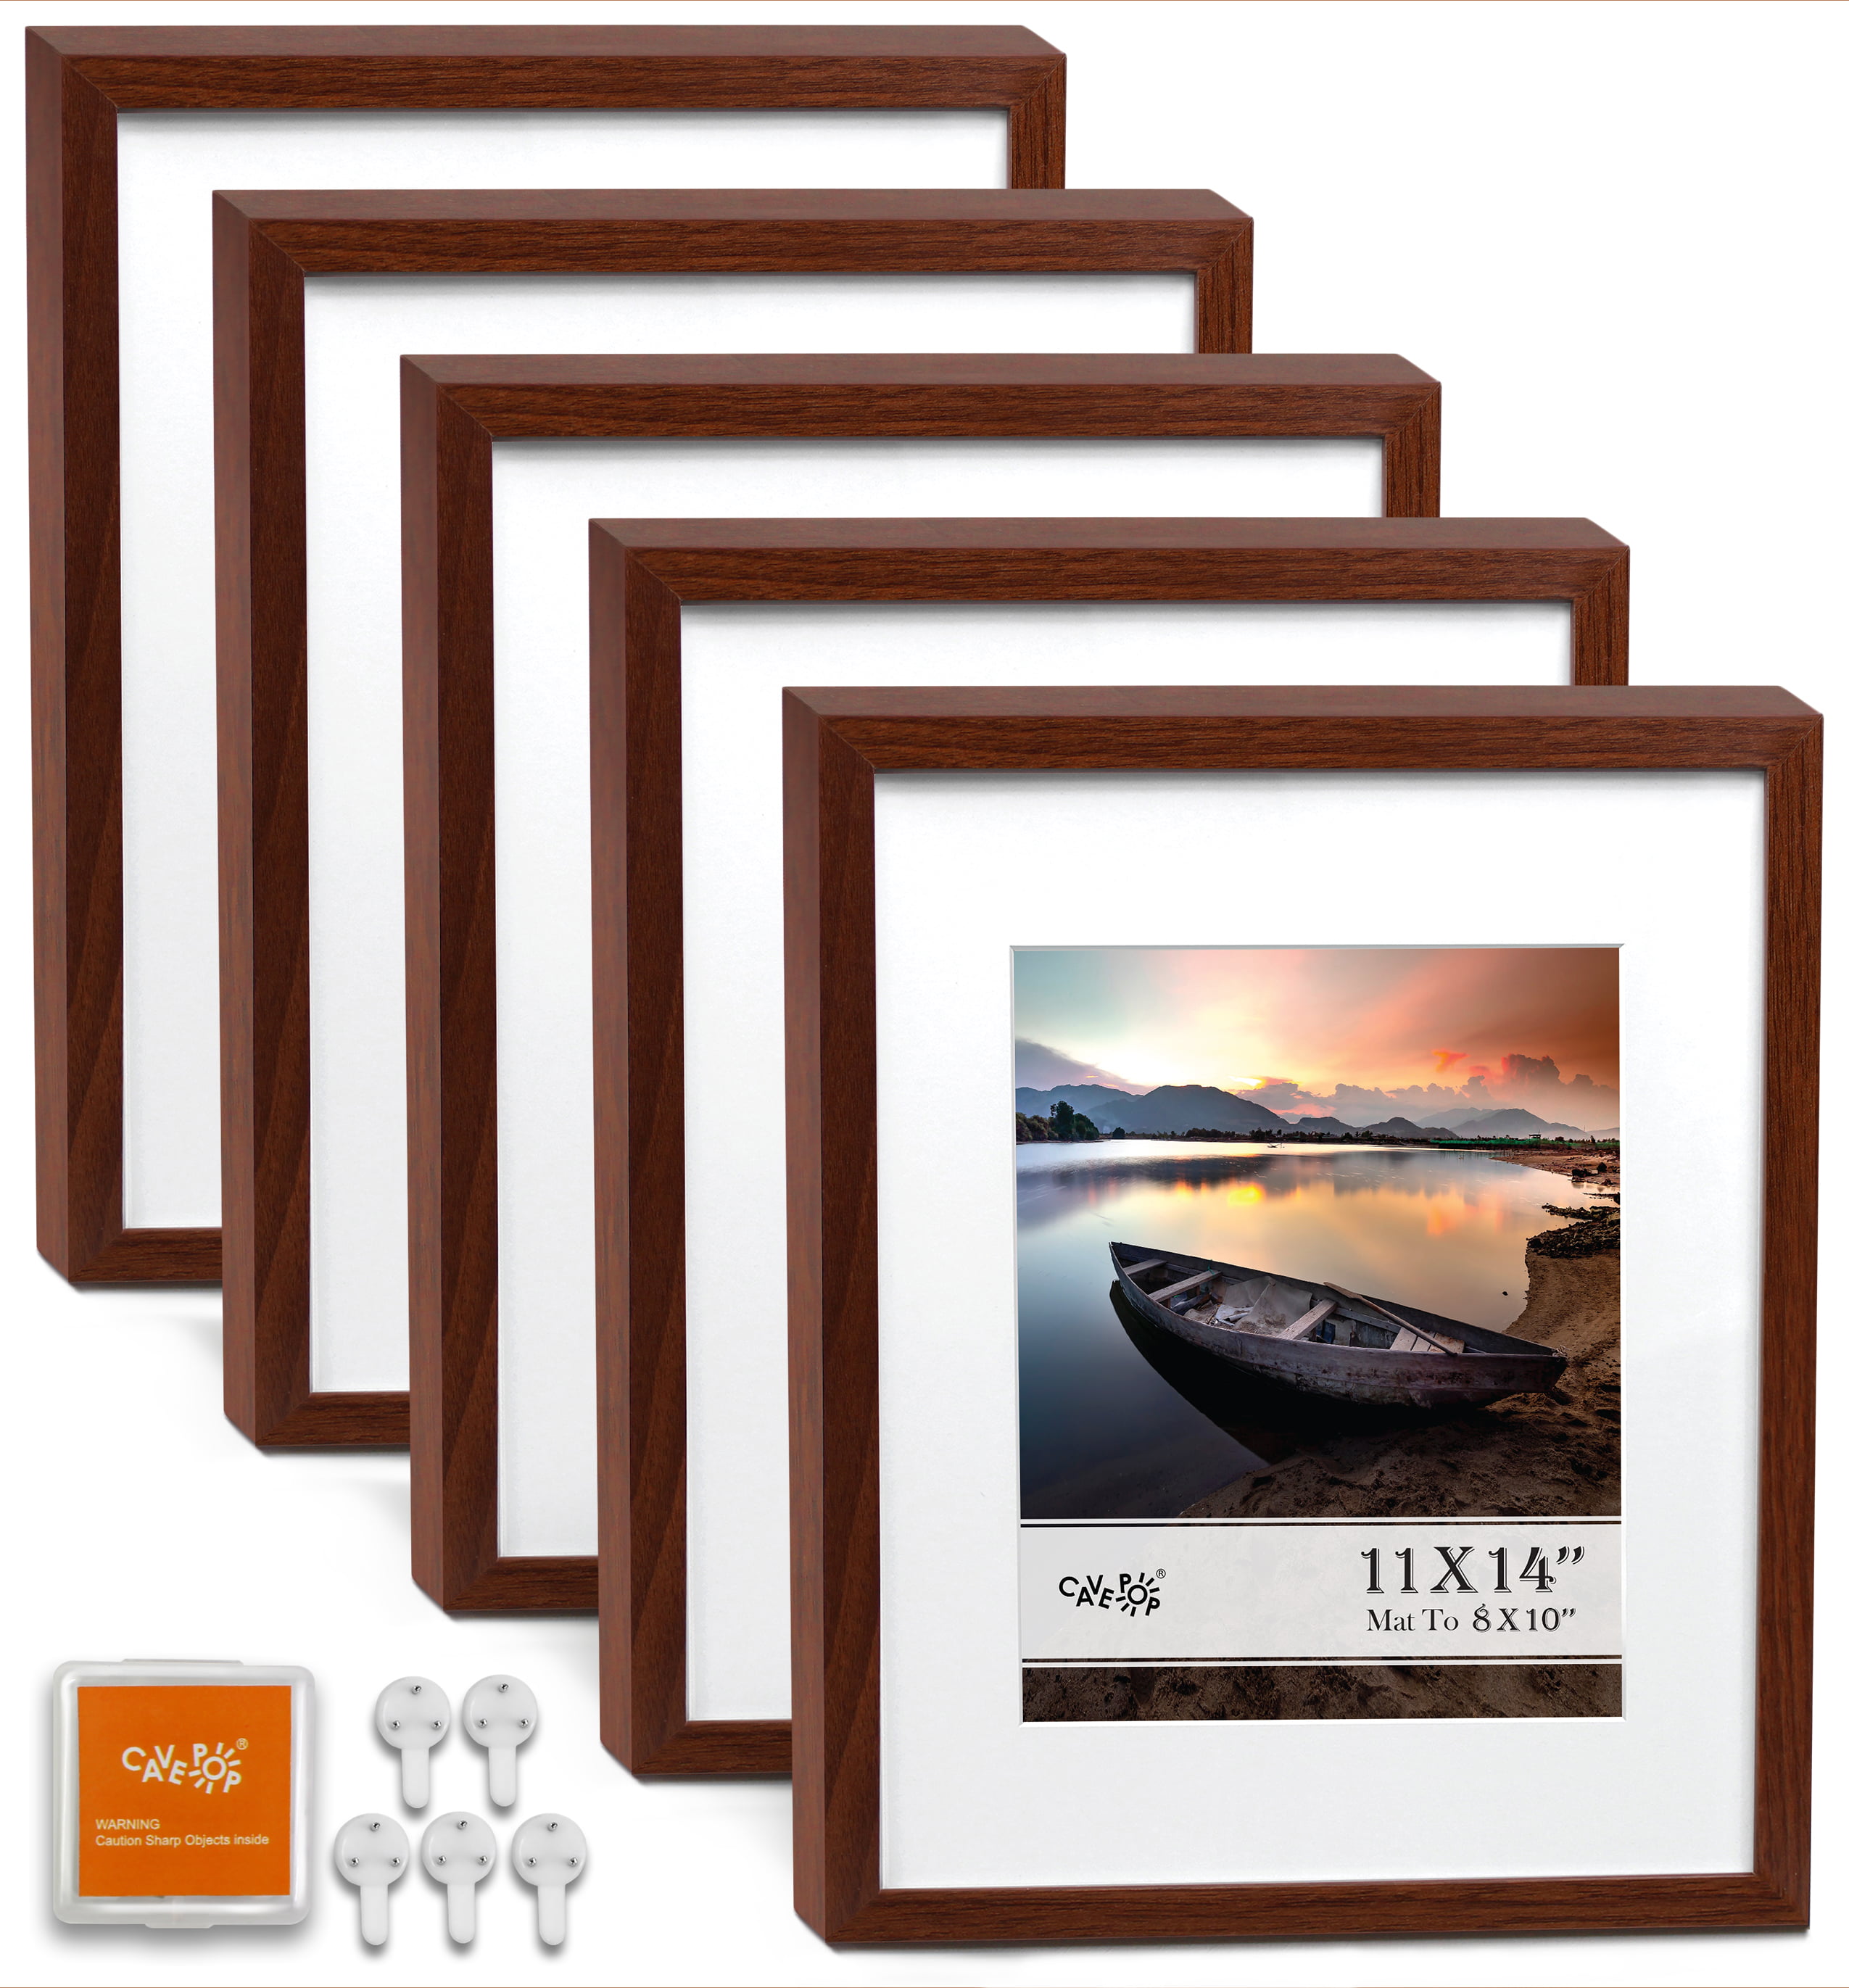 Photo 1 of Cavepop 11x14 Walnut Wood Picture Frames - Mat Cut to Display 8x10 Images - 5 Piece Set